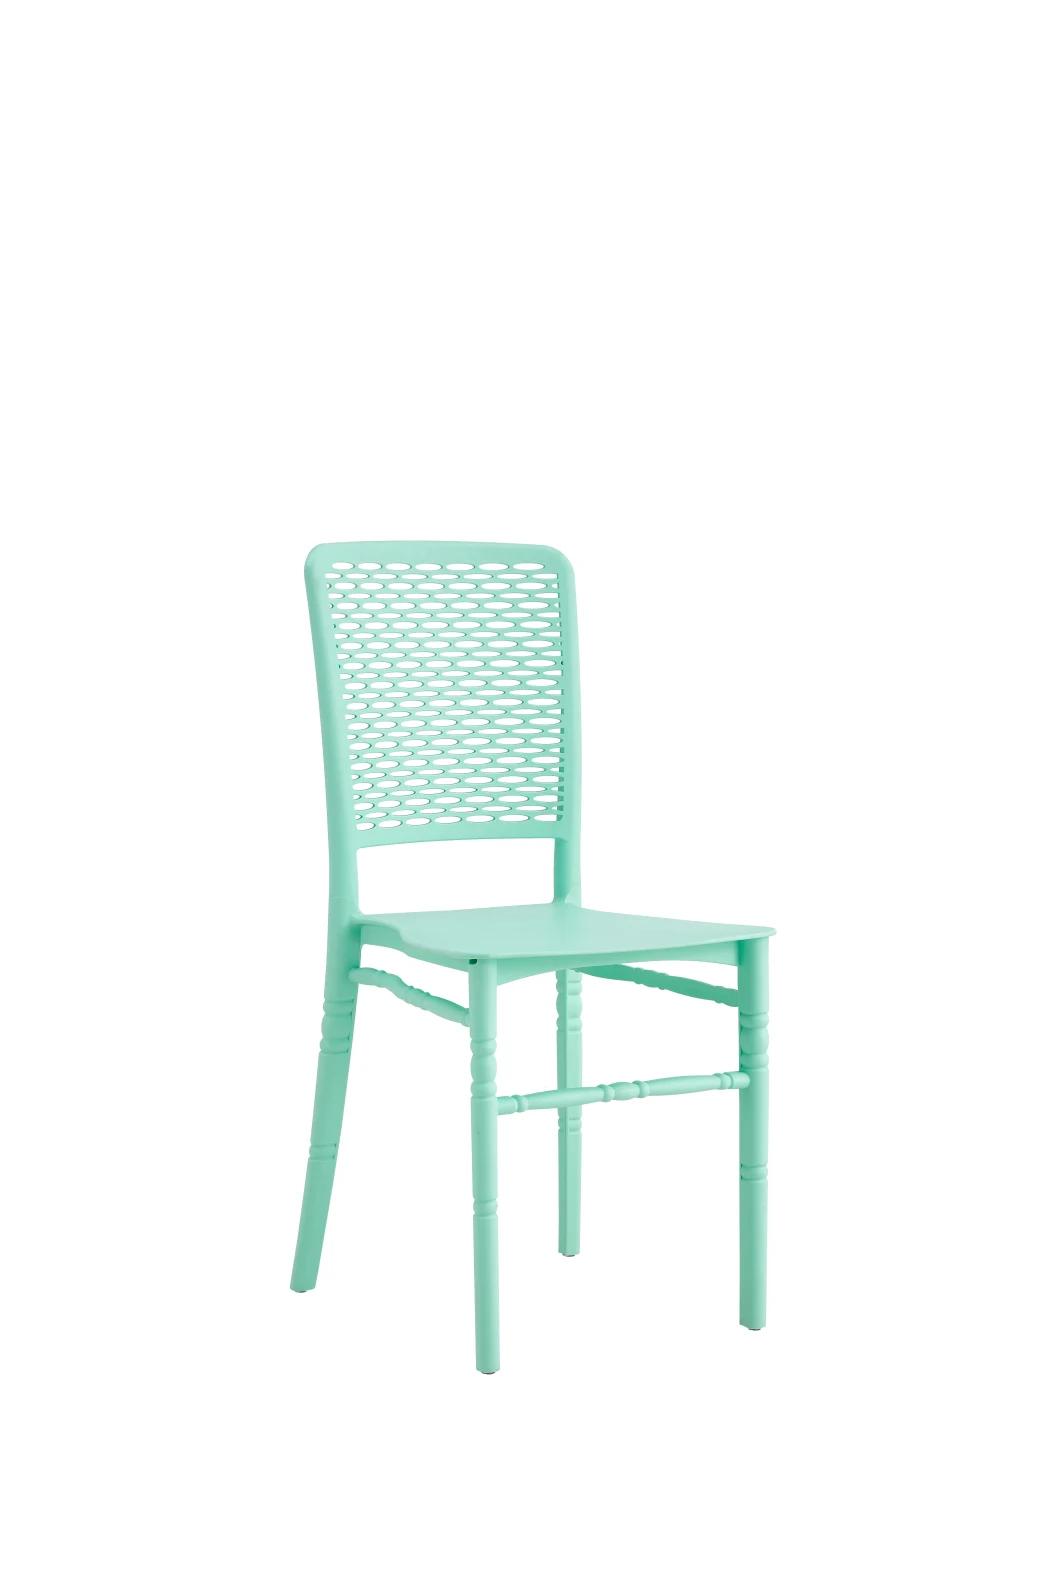 Cheap Plastic Chair for Garden Stackable Outdoor Chair PP Leisure Dining Chair with Arm